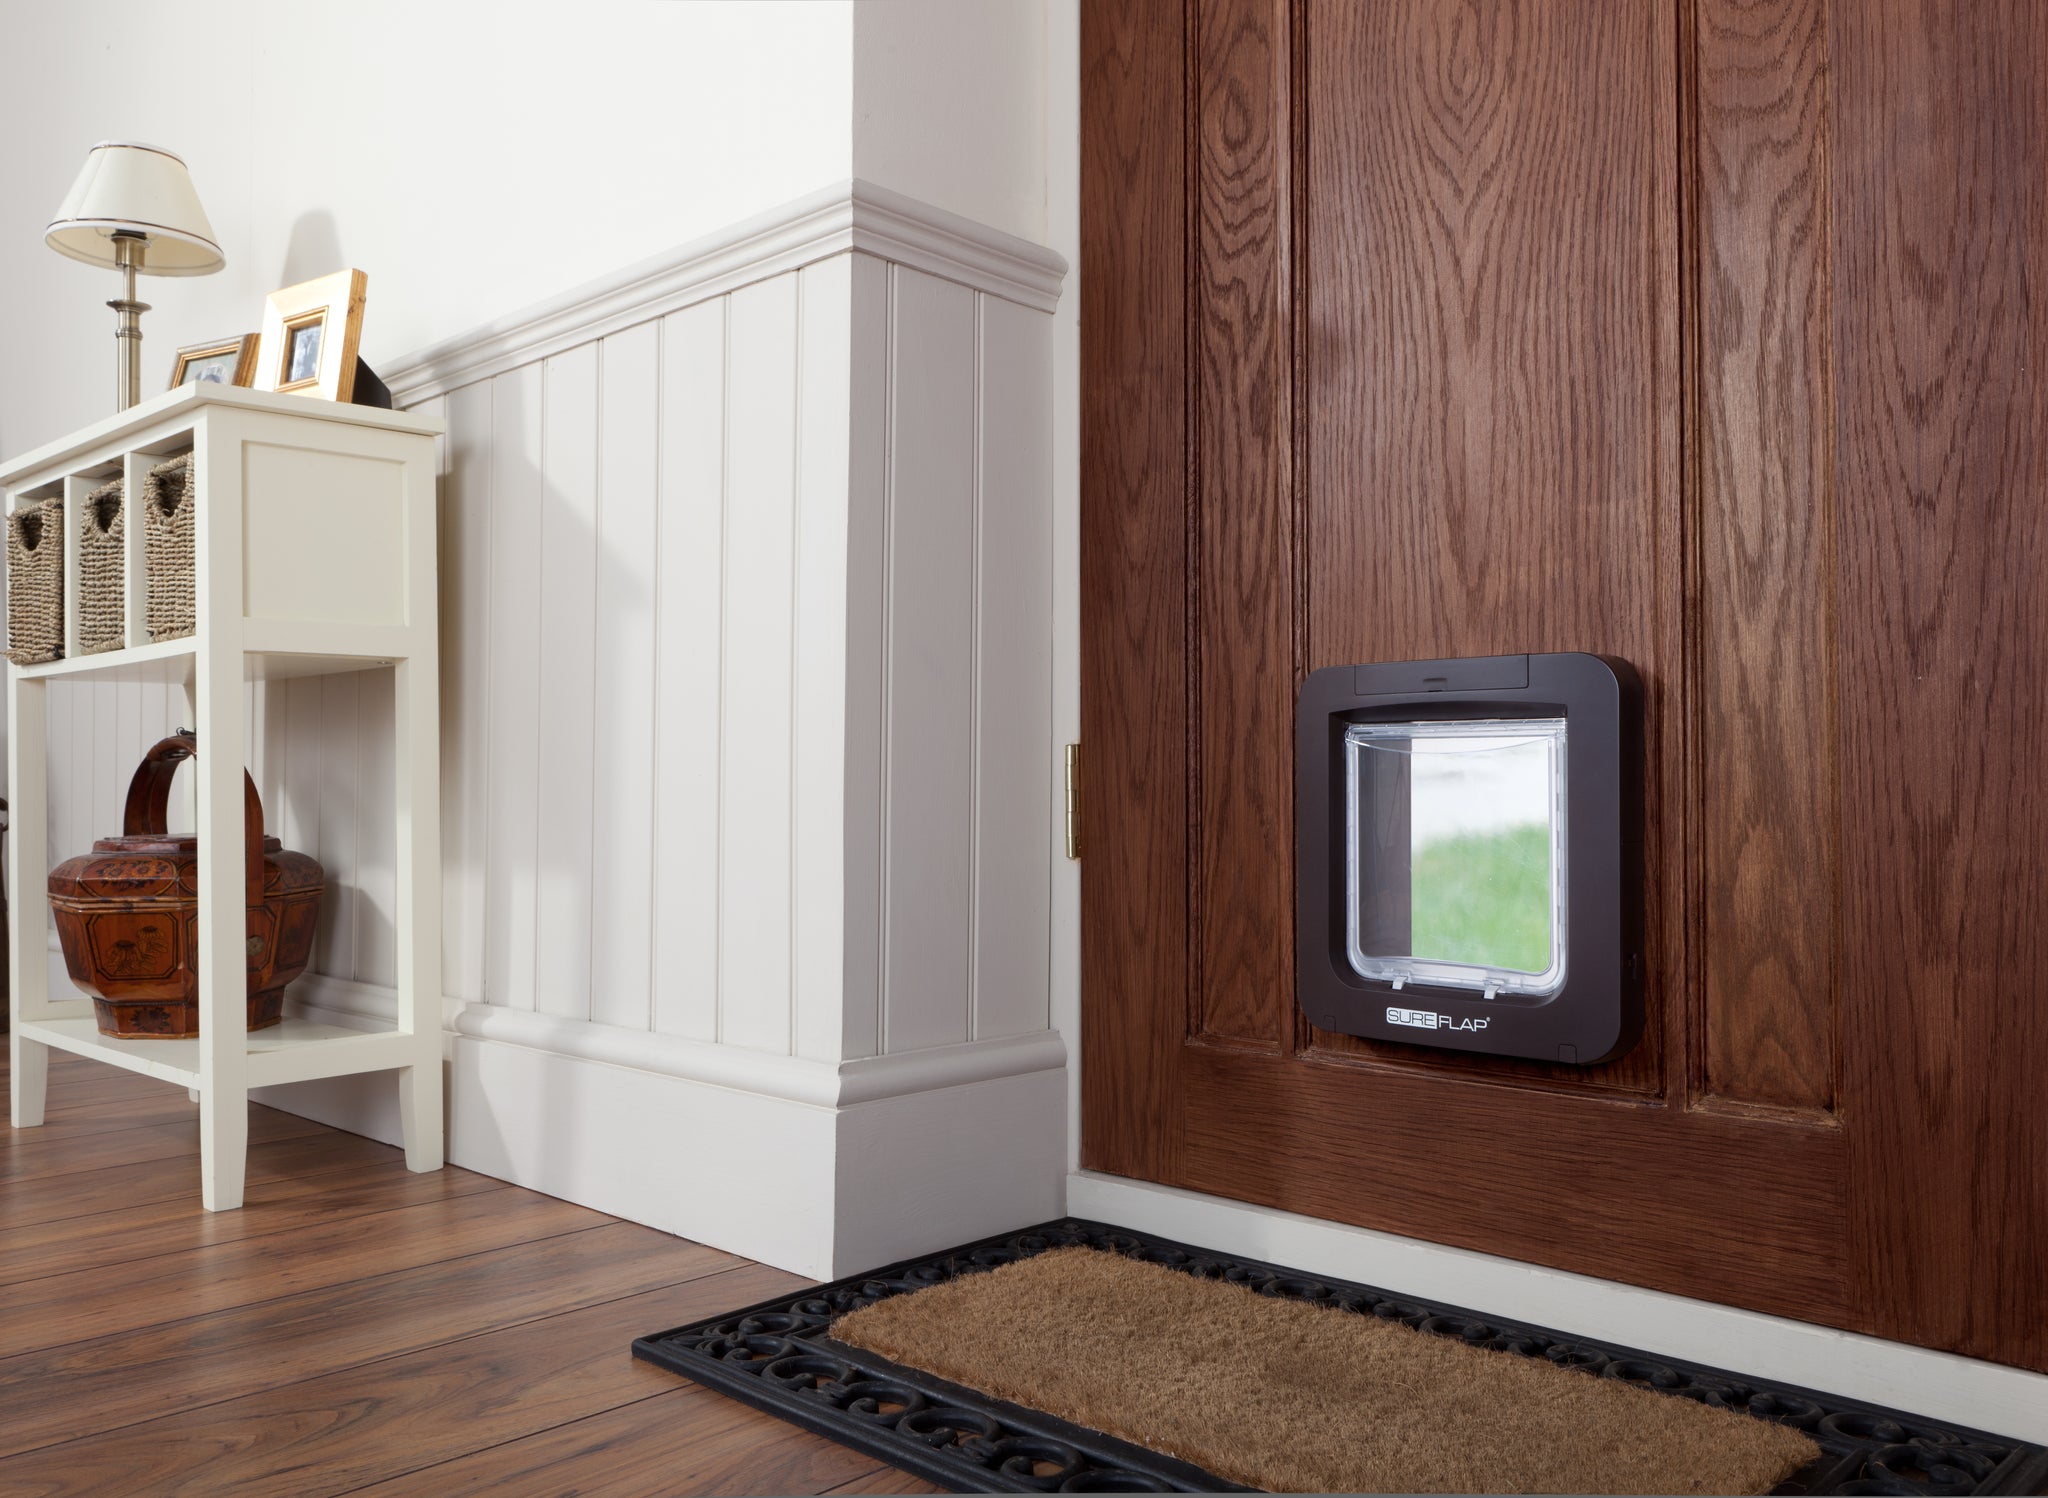 Sureflap manufactures some of the best microchip cat doors with a microchip sensor out there.